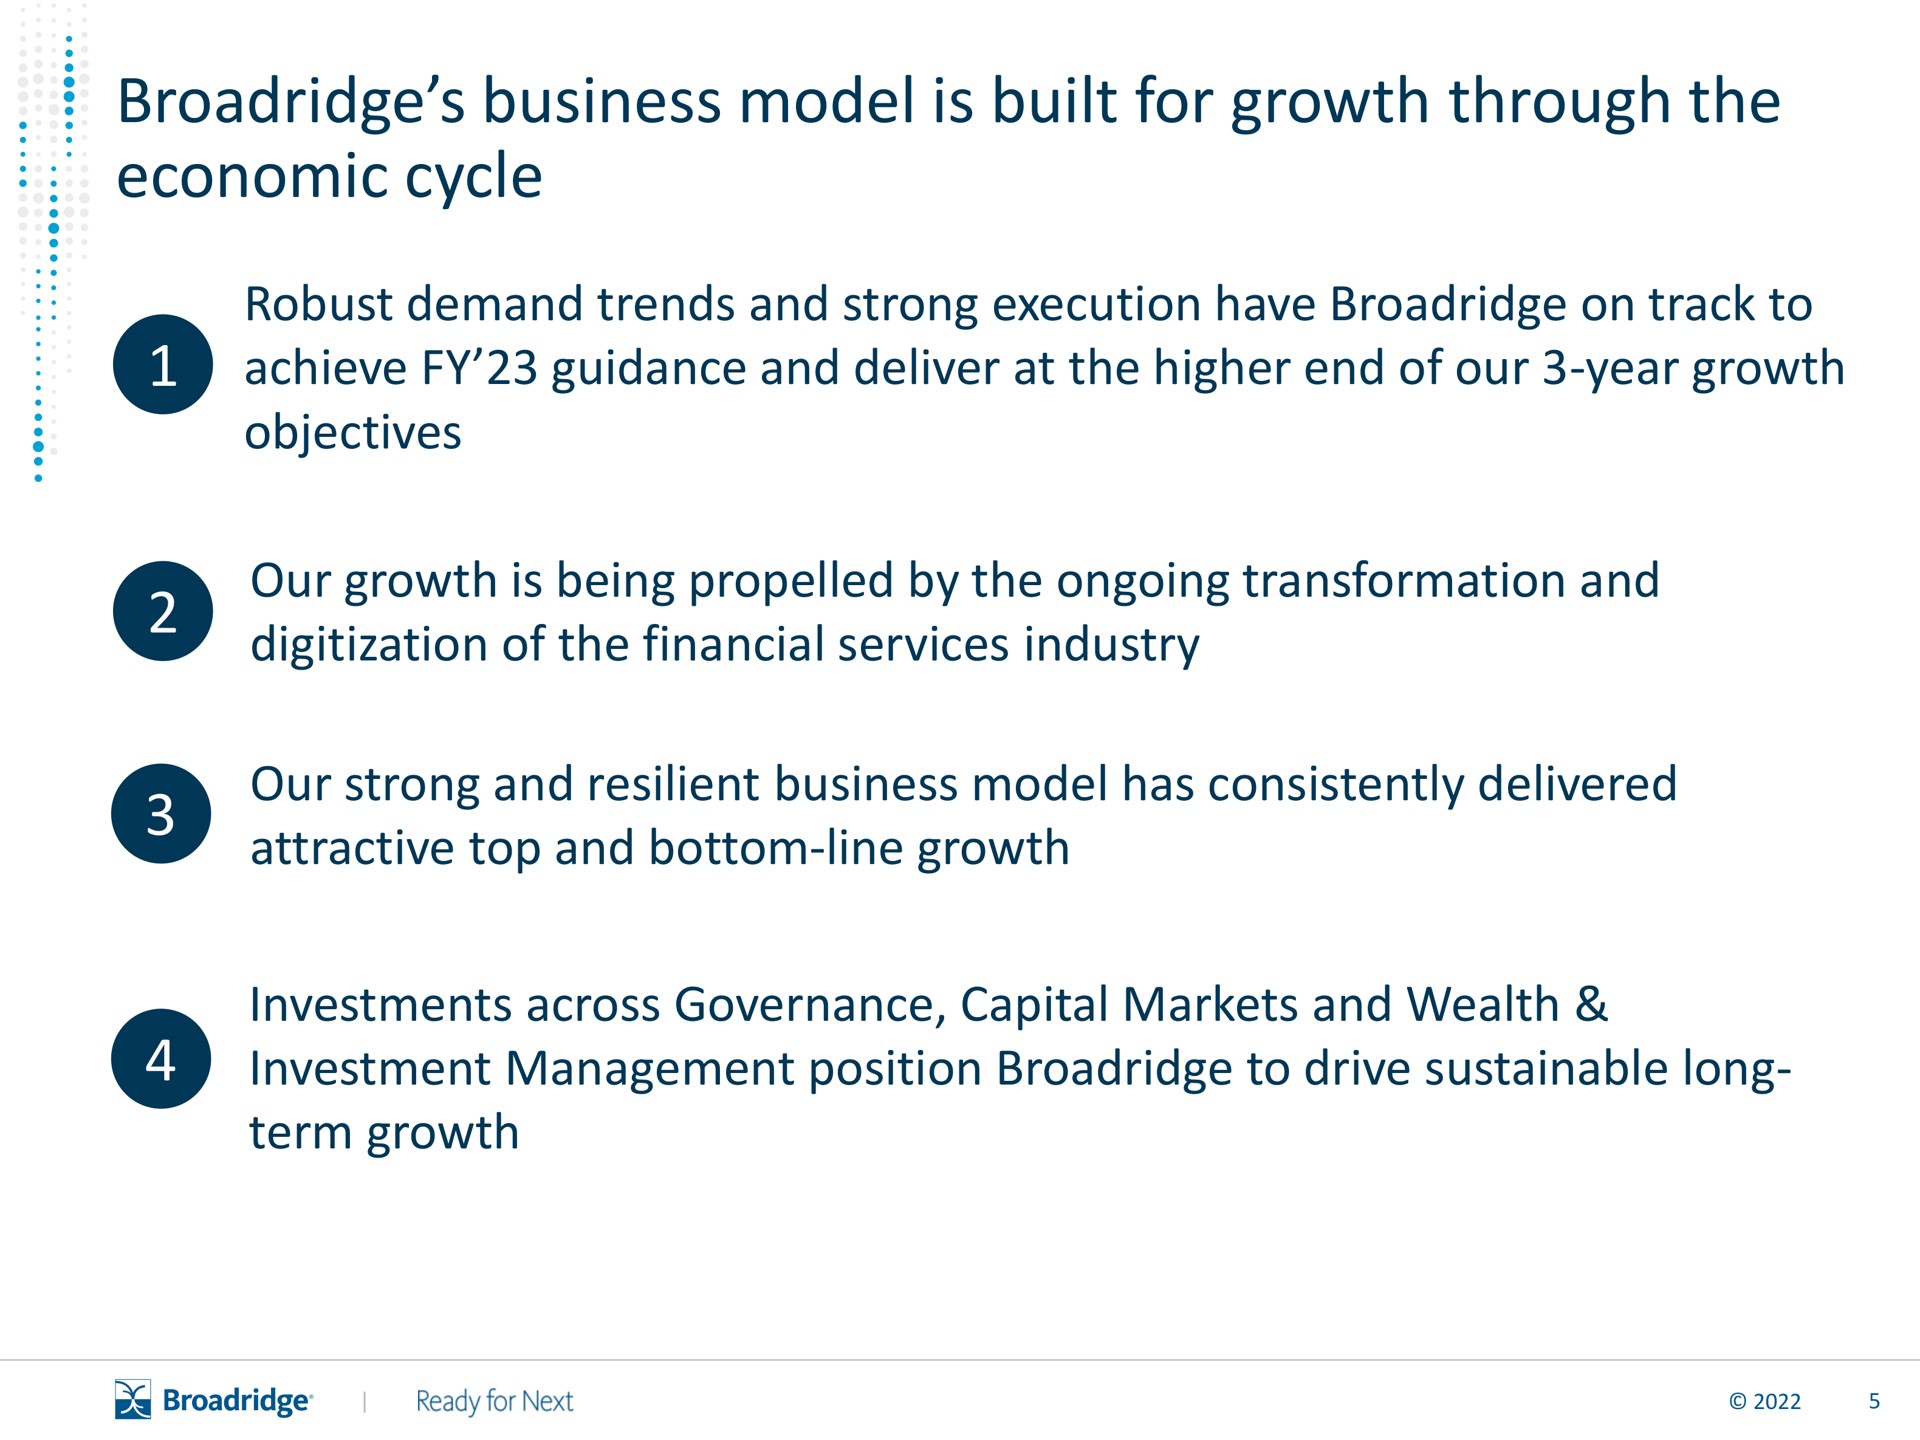 business model is built for growth through the economic cycle robust demand trends and strong execution have on track to achieve guidance and deliver at the higher end of our year growth objectives our growth is being by the ongoing transformation and of the financial services industry our strong and resilient business model has consistently delivered attractive top and bottom line growth investments across governance capital markets and wealth investment management position to drive sustainable long term growth | Broadridge Financial Solutions